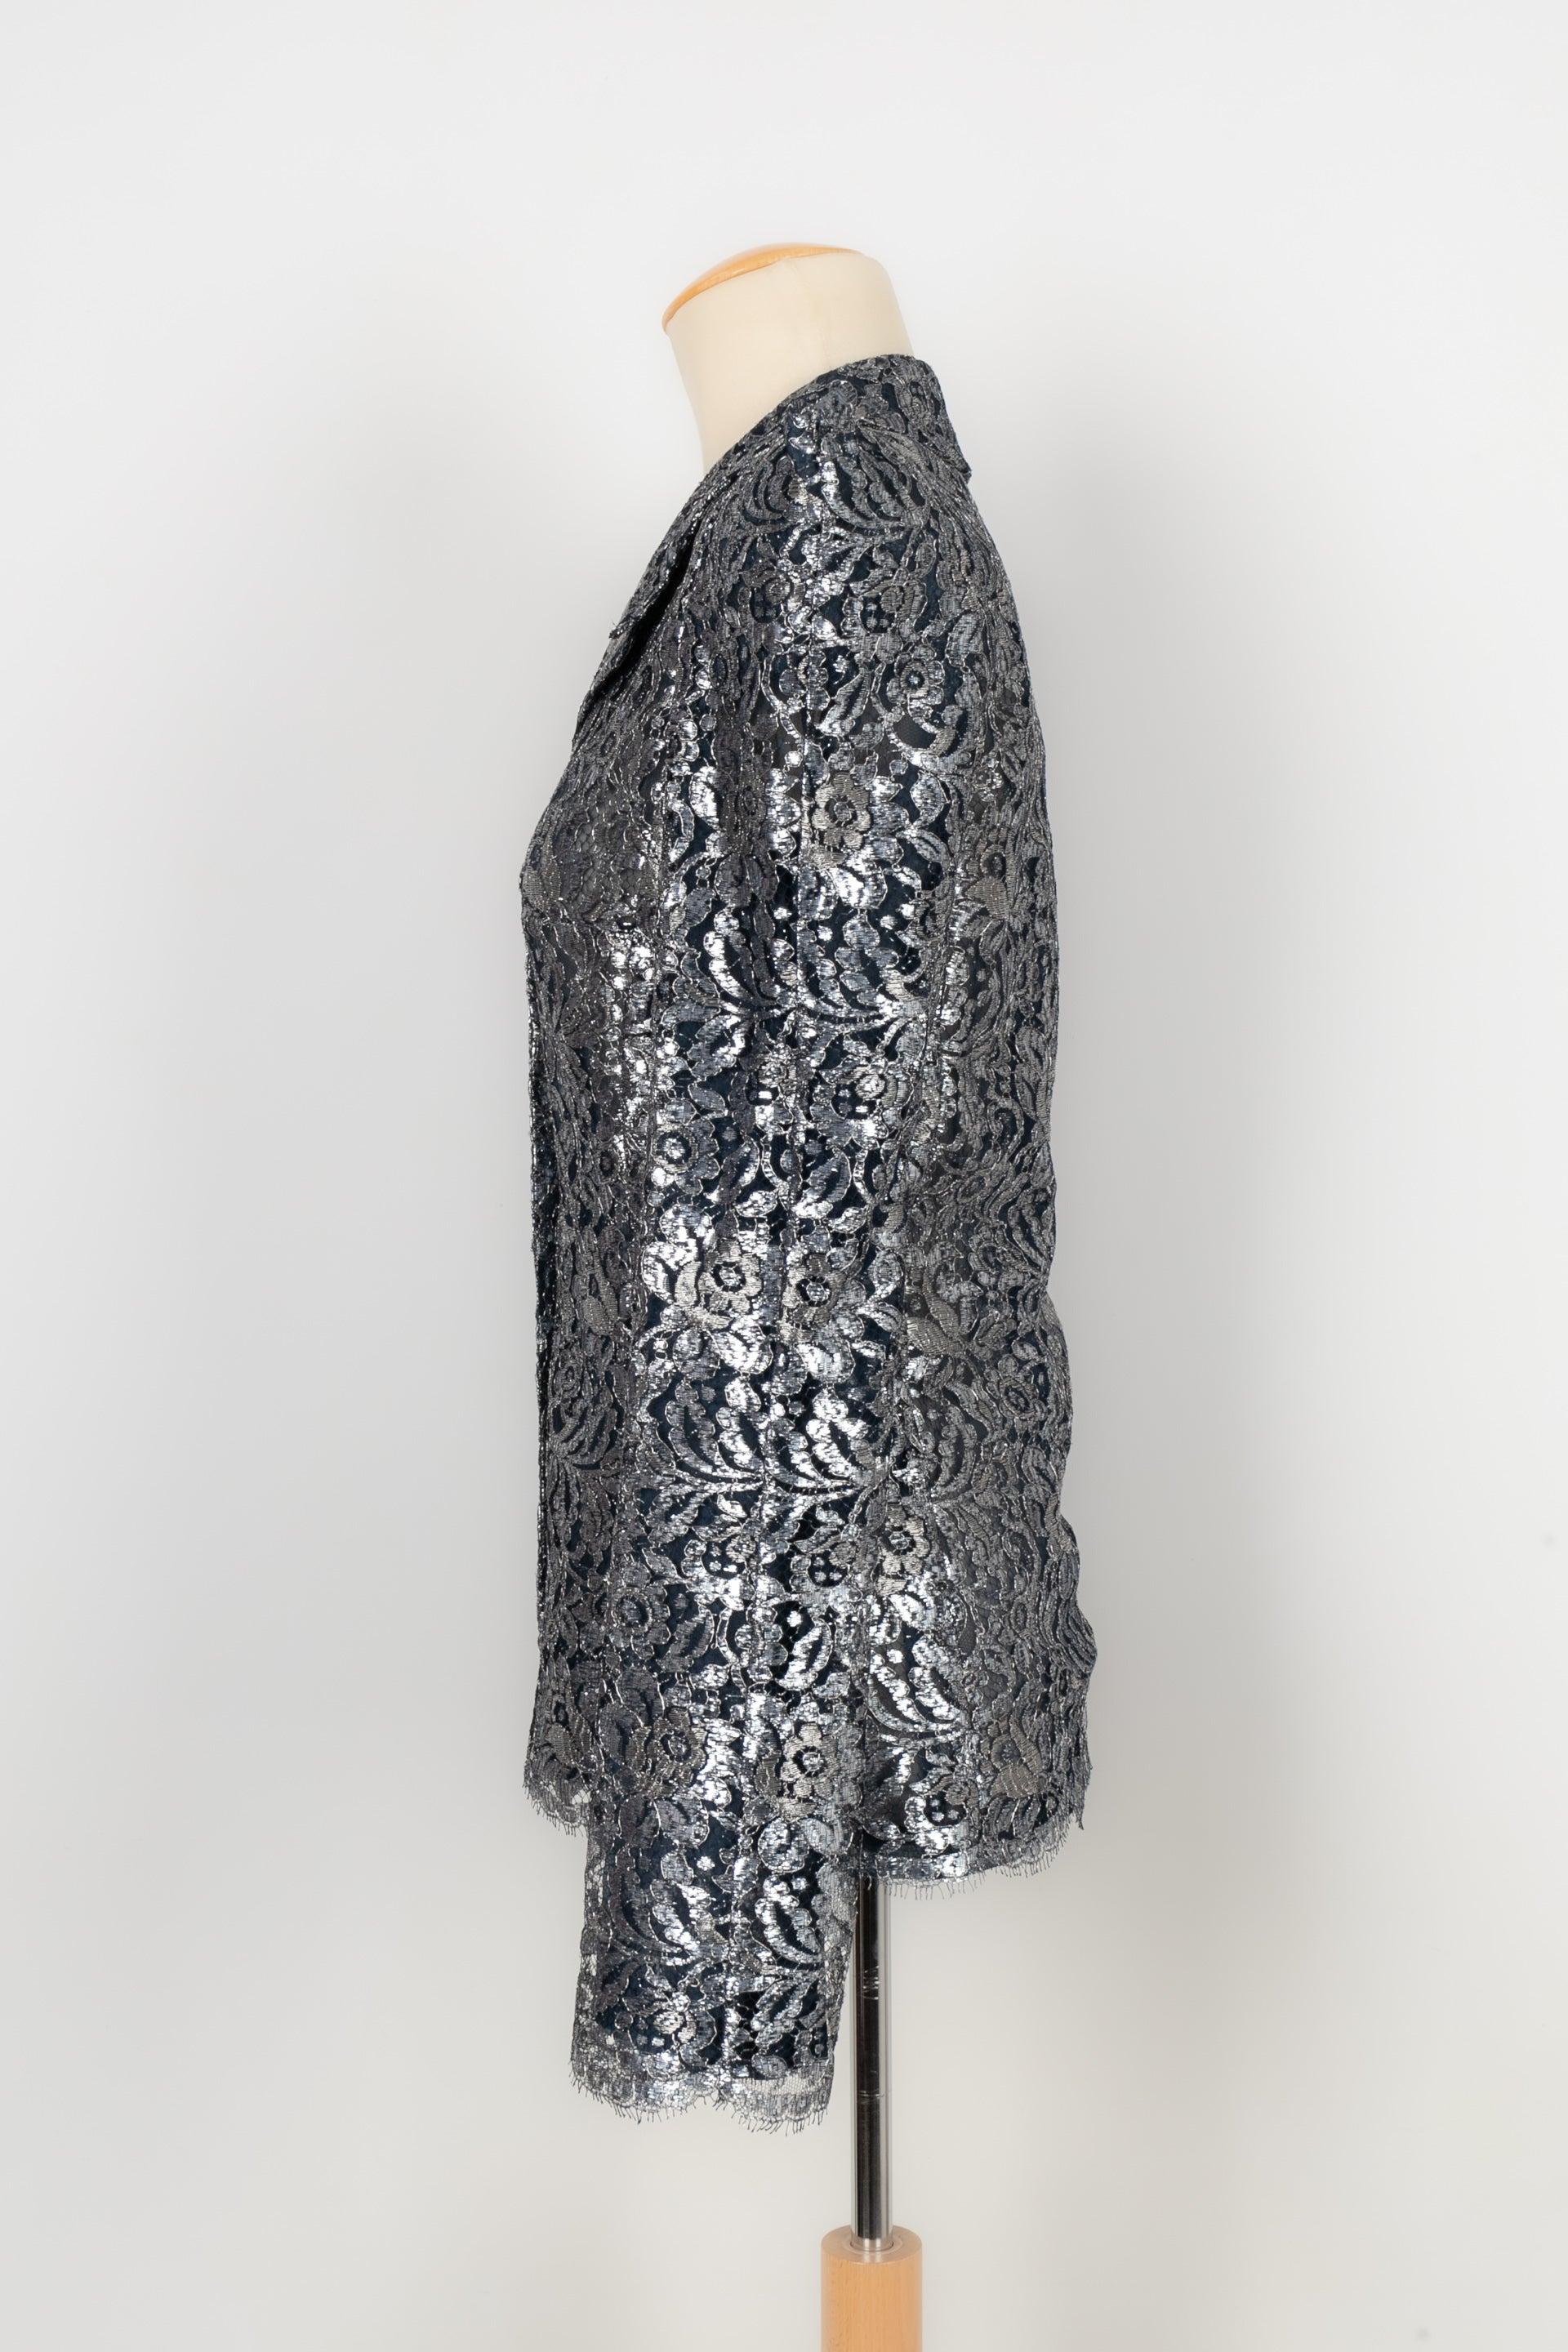 Christian Lacroix - (Made in France) Silver and blue lace jacket. Taffeta lining. Size 38FR.

Additional information:
Condition: Very good condition
Dimensions: Shoulder width: 43 cm - Sleeve length: 60 cm - Length: 62 cm

Seller Reference: FV2